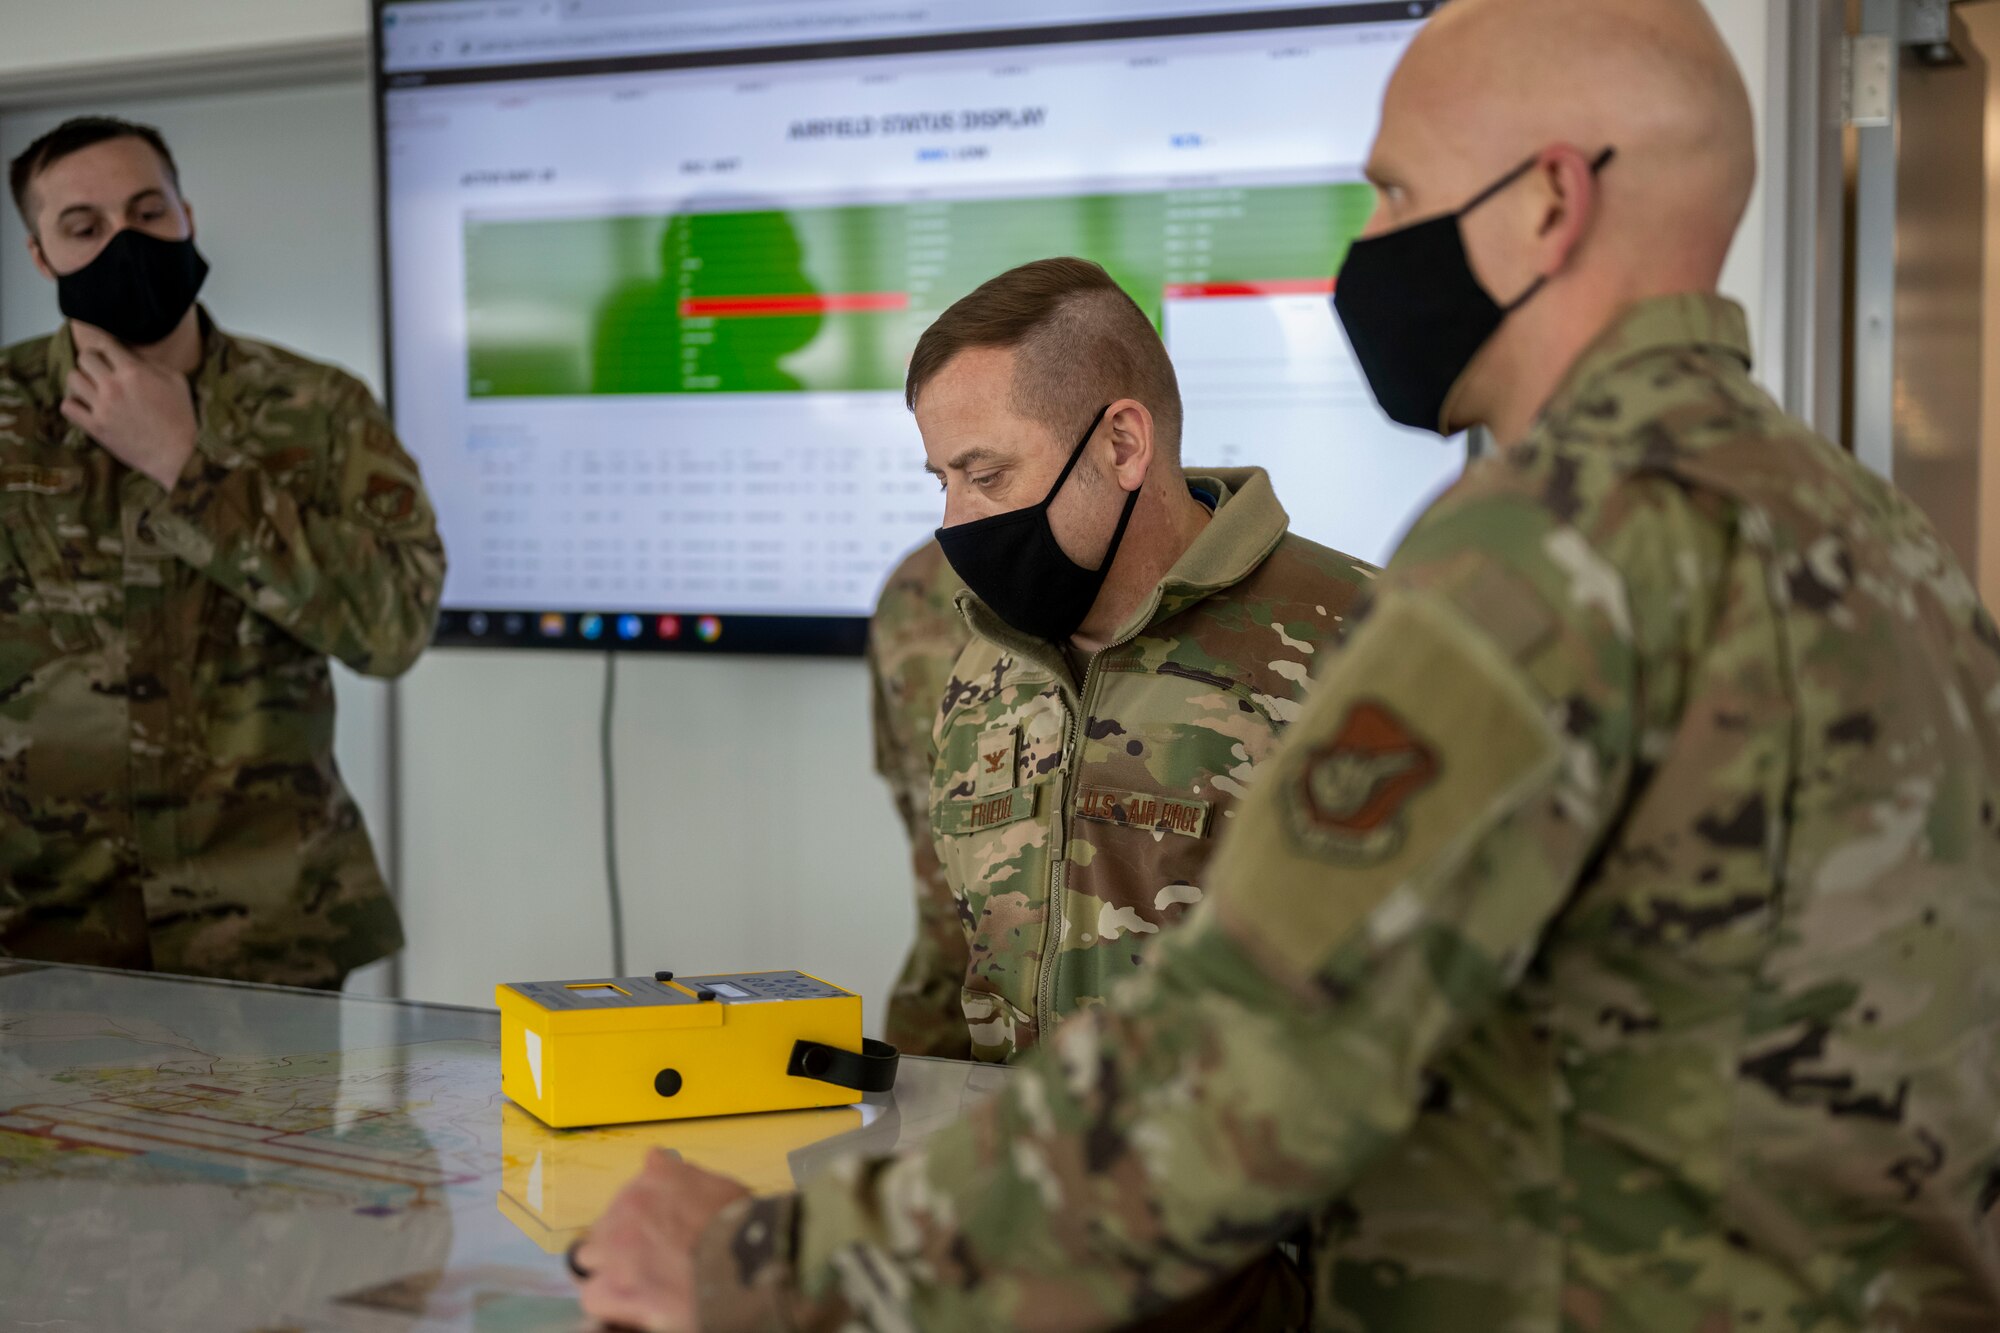 Male service member looking at a yellow electronic box used to determine how much friction a road has.